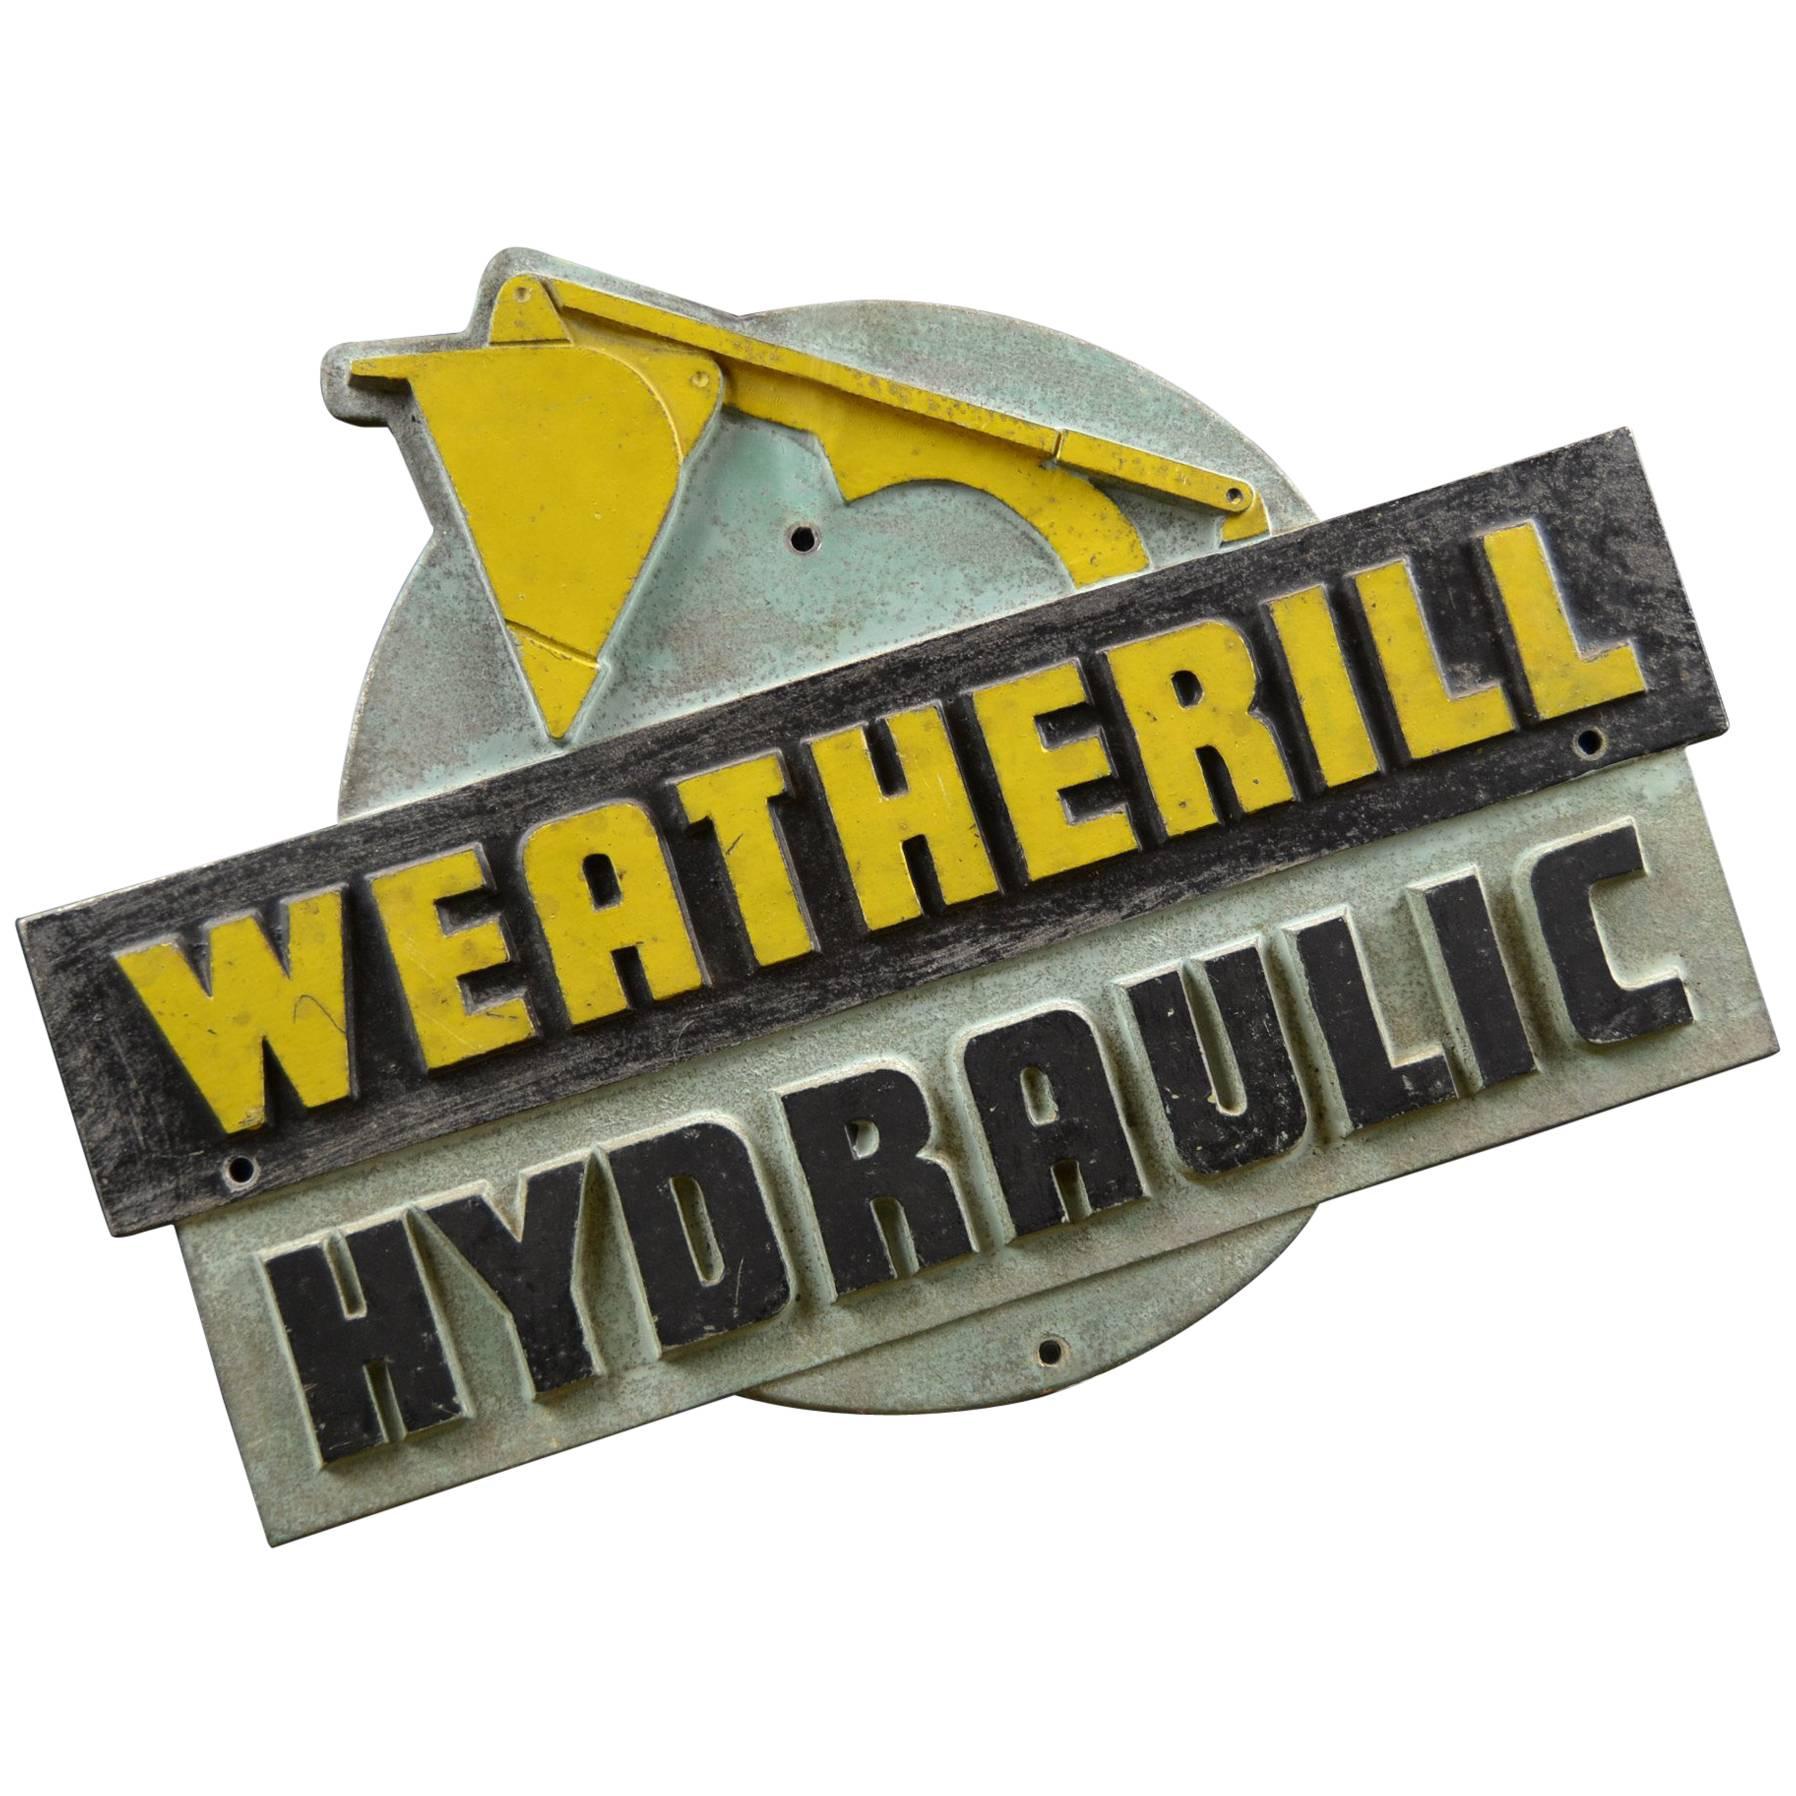 1950s Cast Iron Industrial Weatherill Hydraulic Loader Badge Sign , UK 